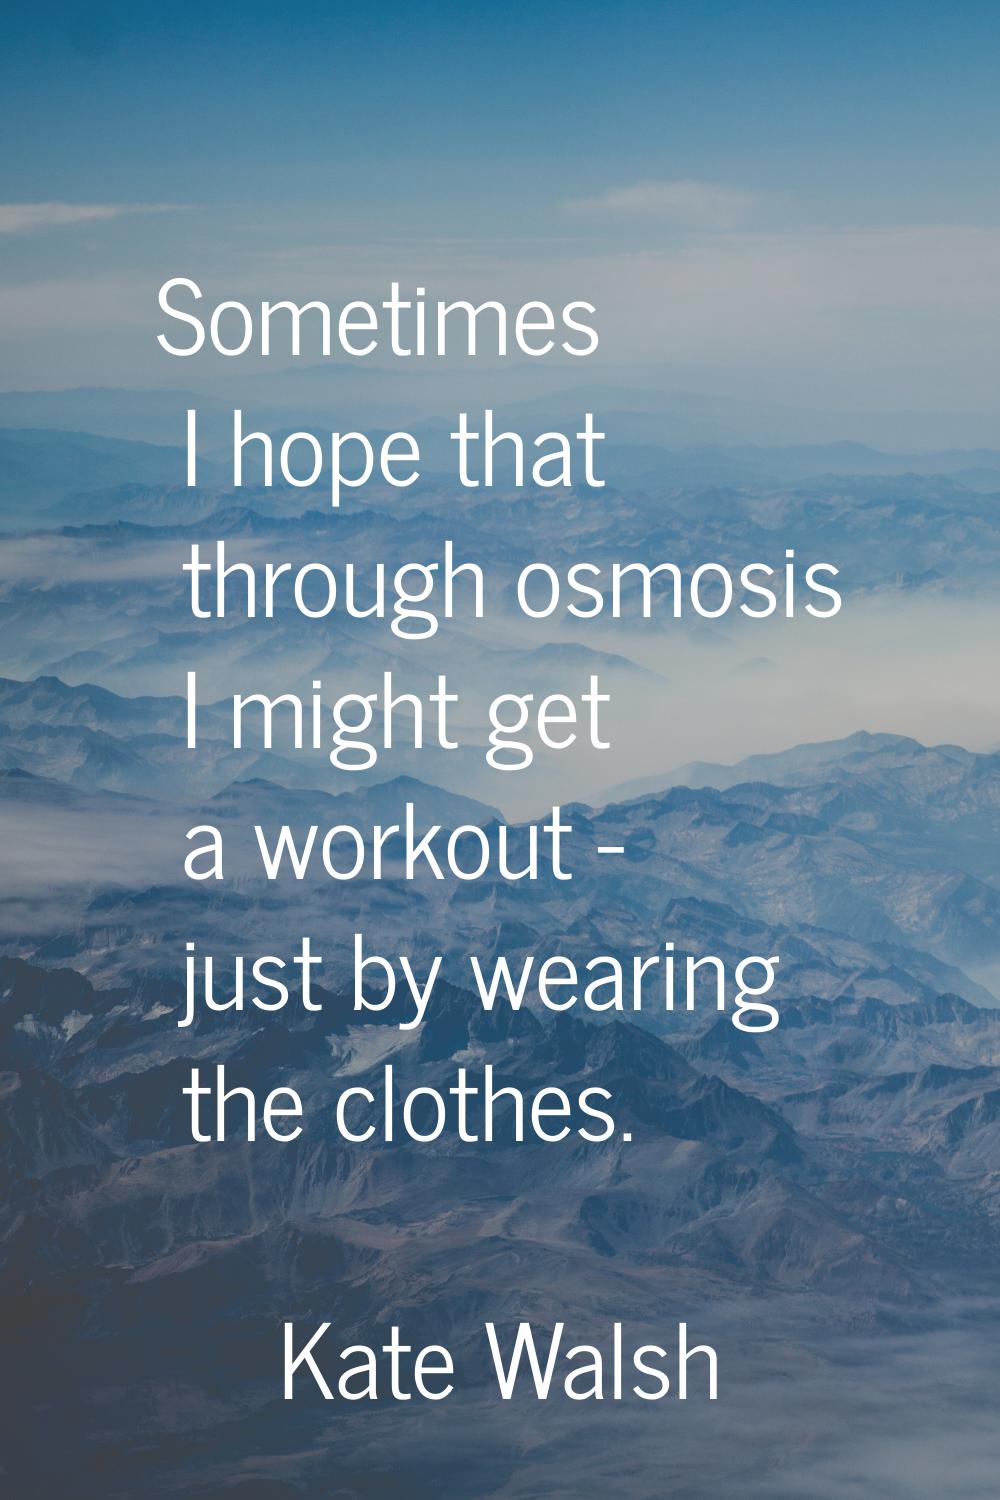 Sometimes I hope that through osmosis I might get a workout - just by wearing the clothes.